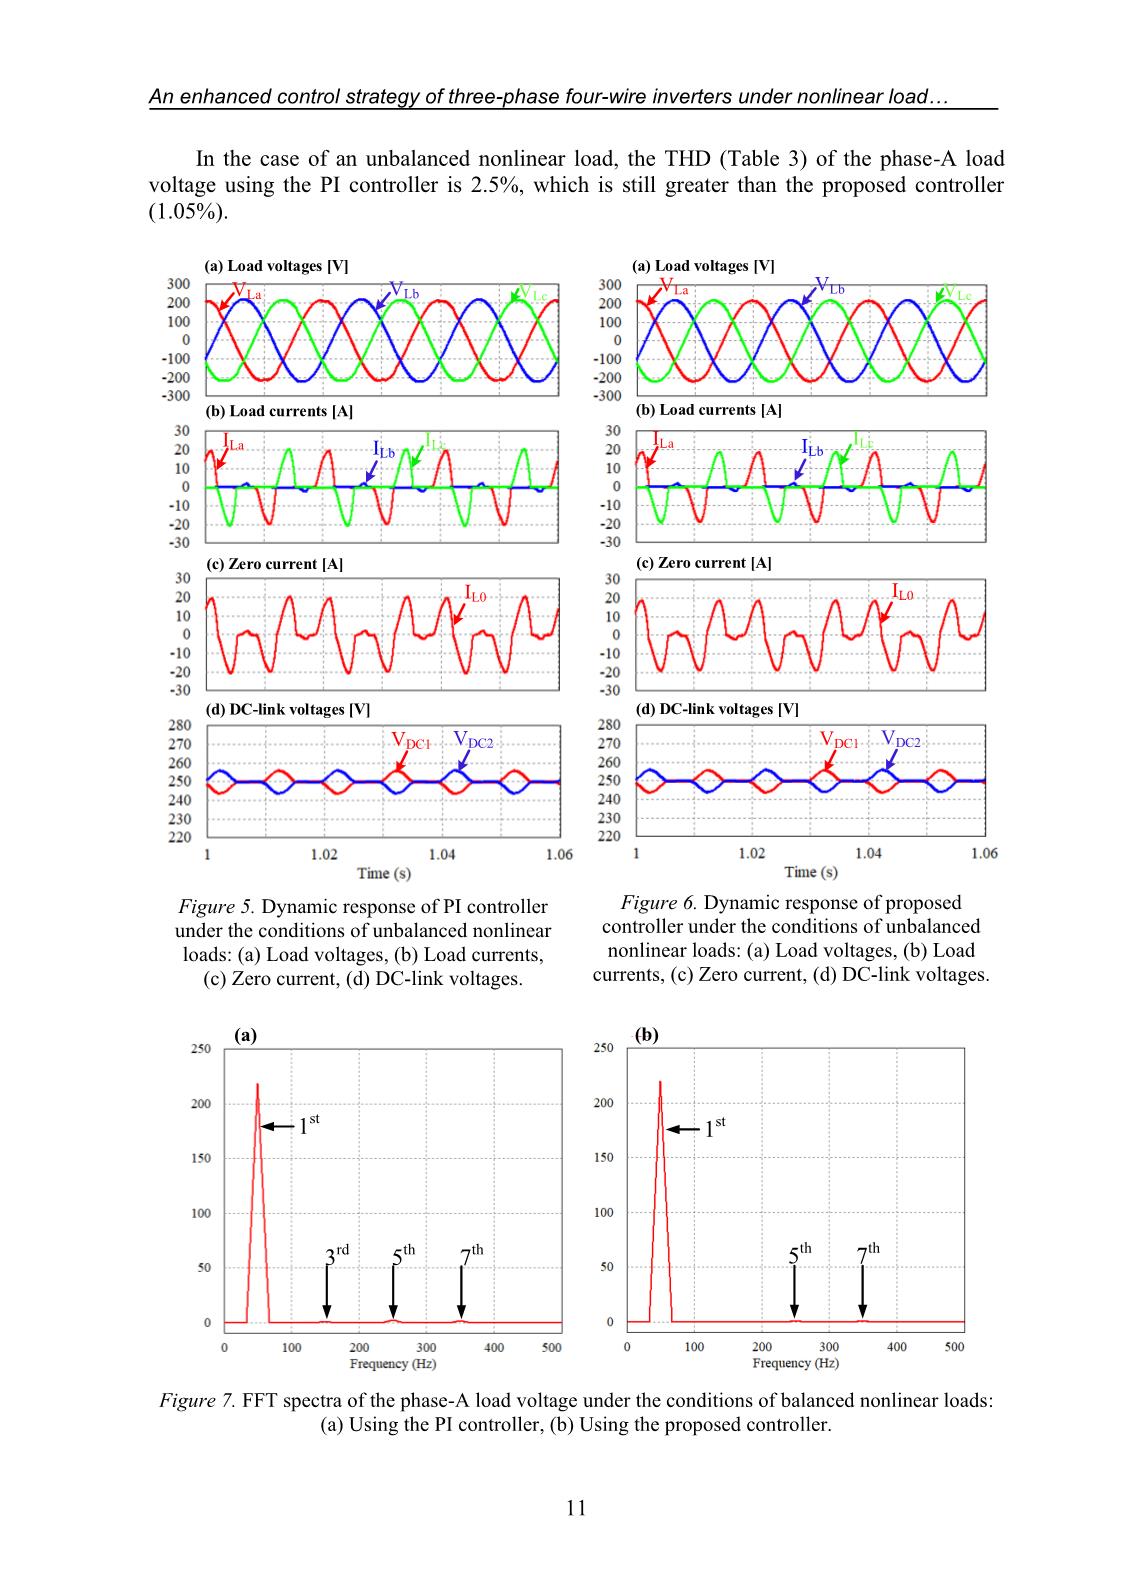 An enhanced control strategy of three - phase four - wire inverters under nonlinear load conditions trang 9